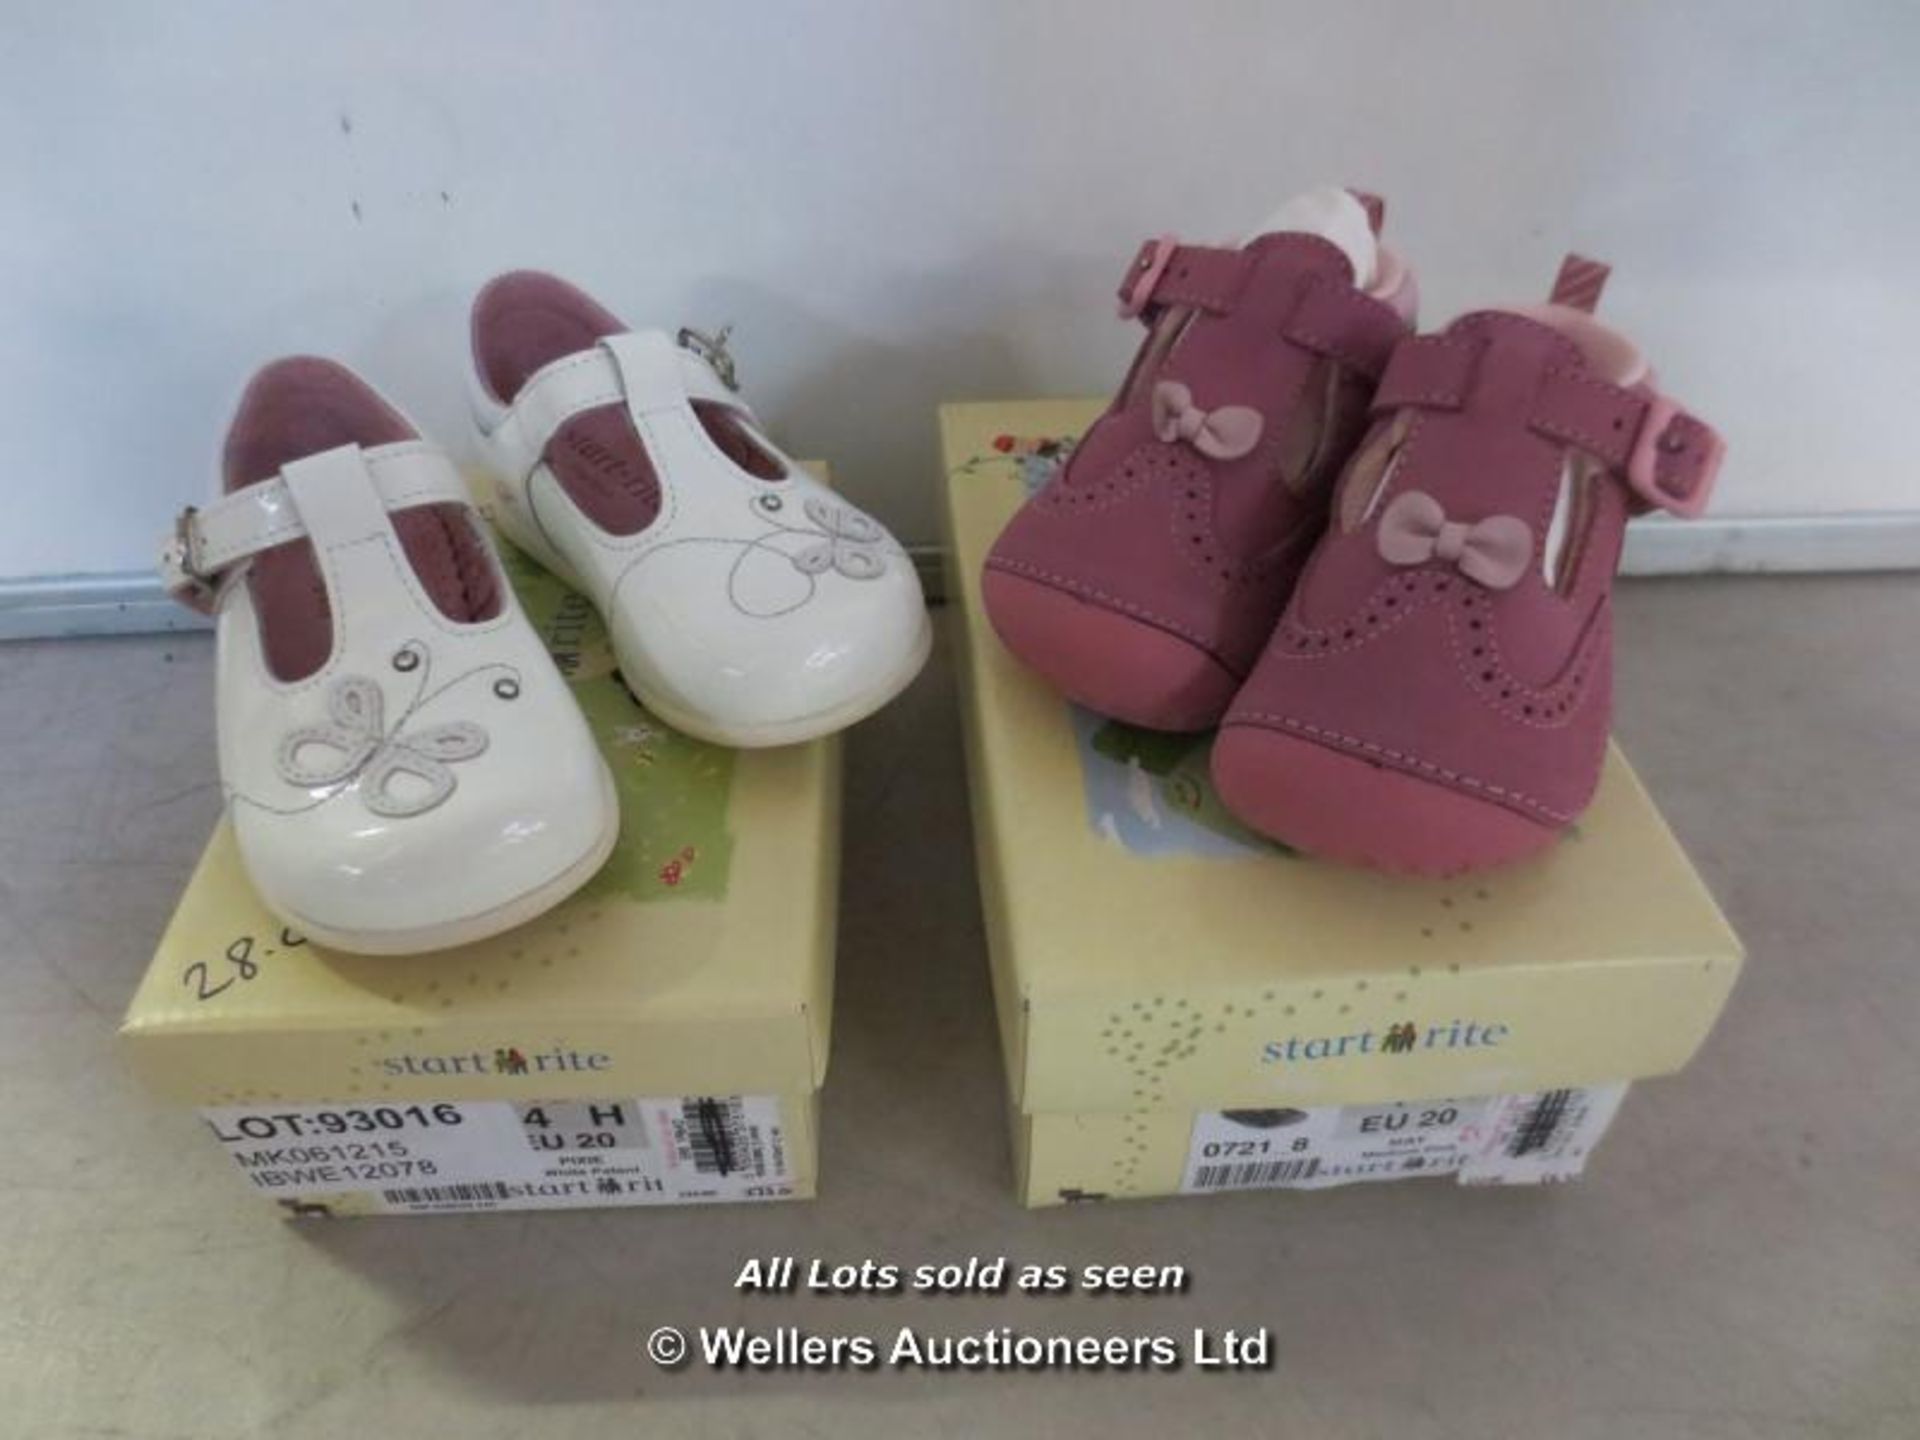 2X PAIRS OF CHILDRENS START RITES INC PIXIE 4H & MAY 4H / GRADE: BRAND NEW / BOXED (DC1) {AISLE '2'}